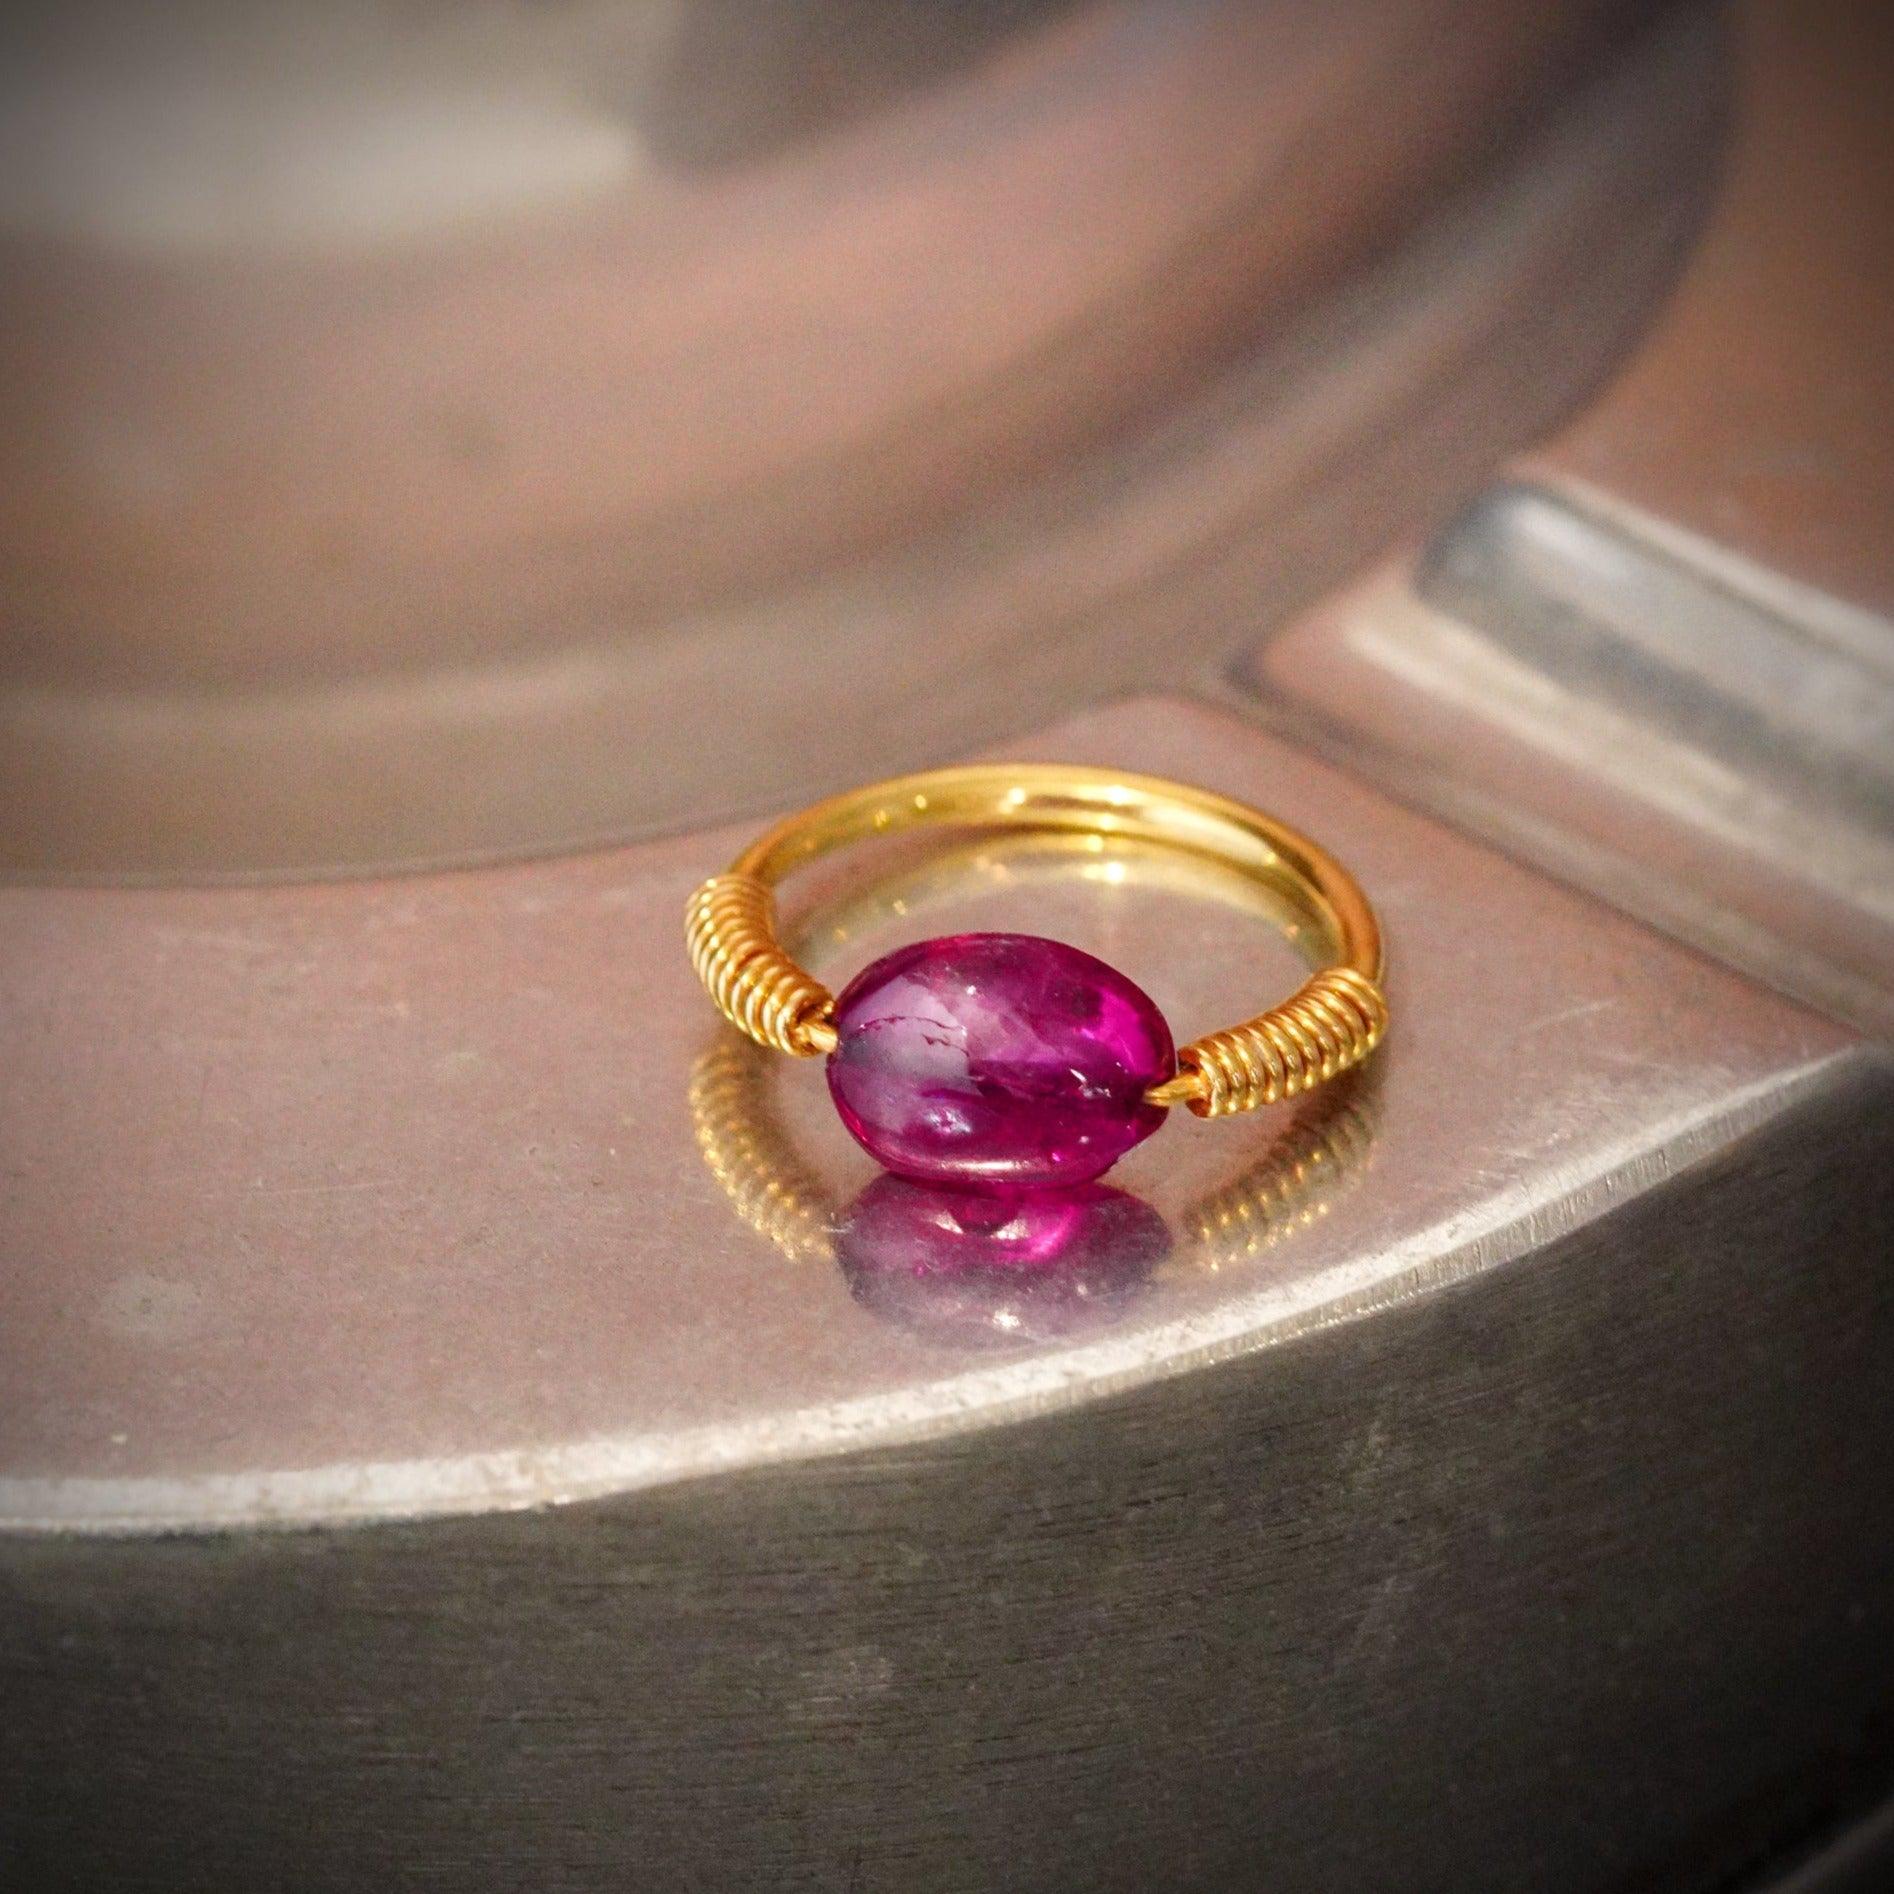 Handcrafted Ruby Bead Ring - 2 CT No Heat in Suspended Setting by Anup Jogani